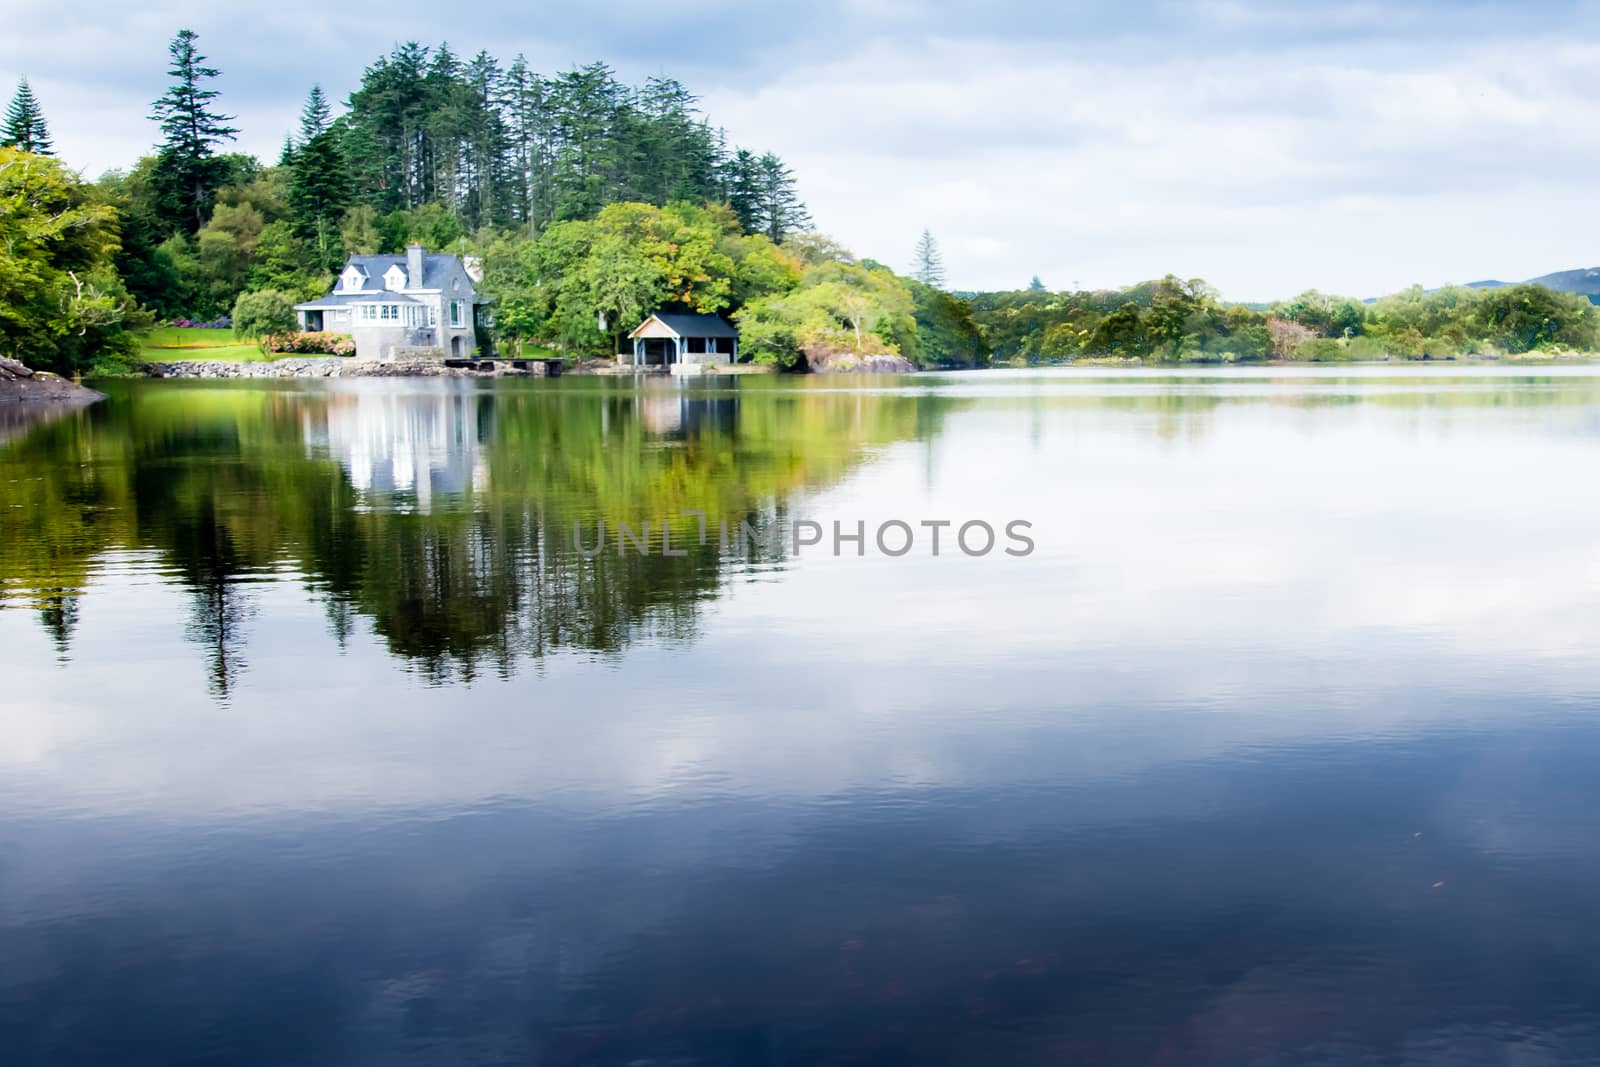 Lake house with mirrored background in Ireland